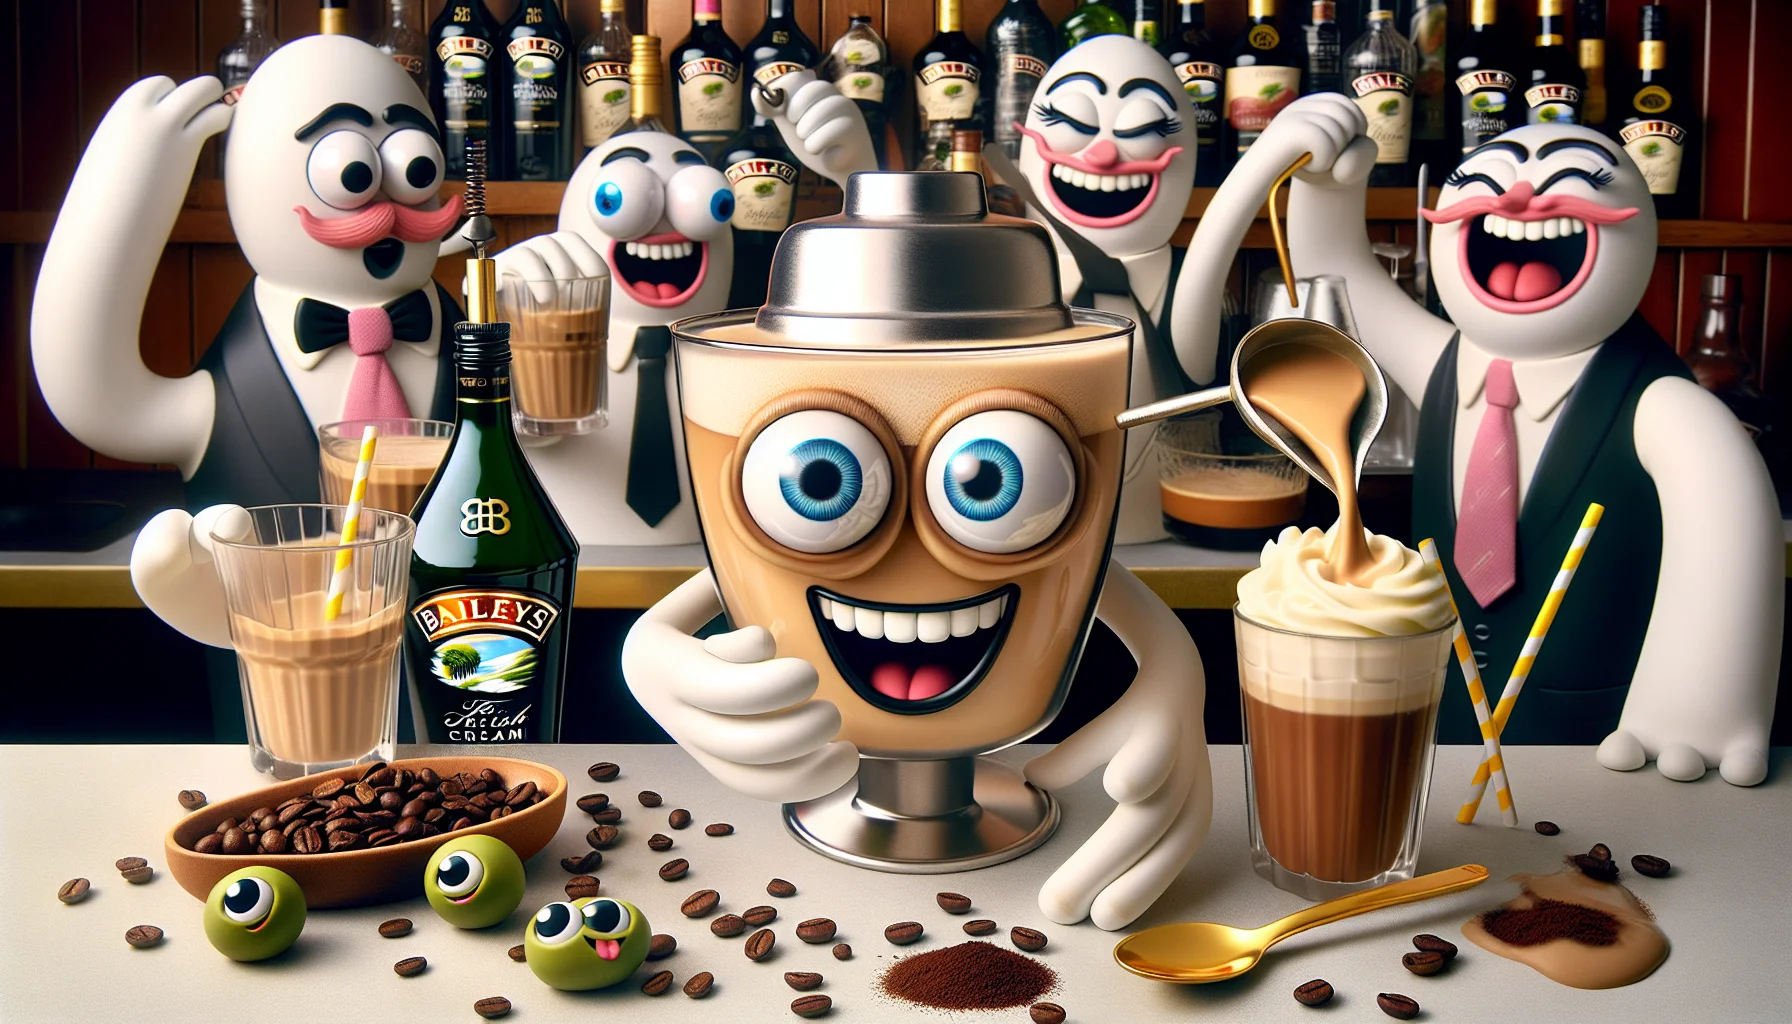 A lively and delightful scene showcasing the intricate process of making an Espresso Martini with Baileys. In the center, a quirky cocktail shaker with eyes is vigorously mixing the ingredients - coffee, vodka, Baileys Irish Cream, and simple syrup. It is wearing a cheerful tie, signaling it's enjoying its duty. On the counter, other humorous ingredients are lined up waiting their turn, exhibiting expressive faces, while two garnish olives are laughing at a joke narrated by a spoon. All around, an atmosphere of joy and revelry encourages onlookers to partake in the fun of making and savoring this delightfully rich cocktail.